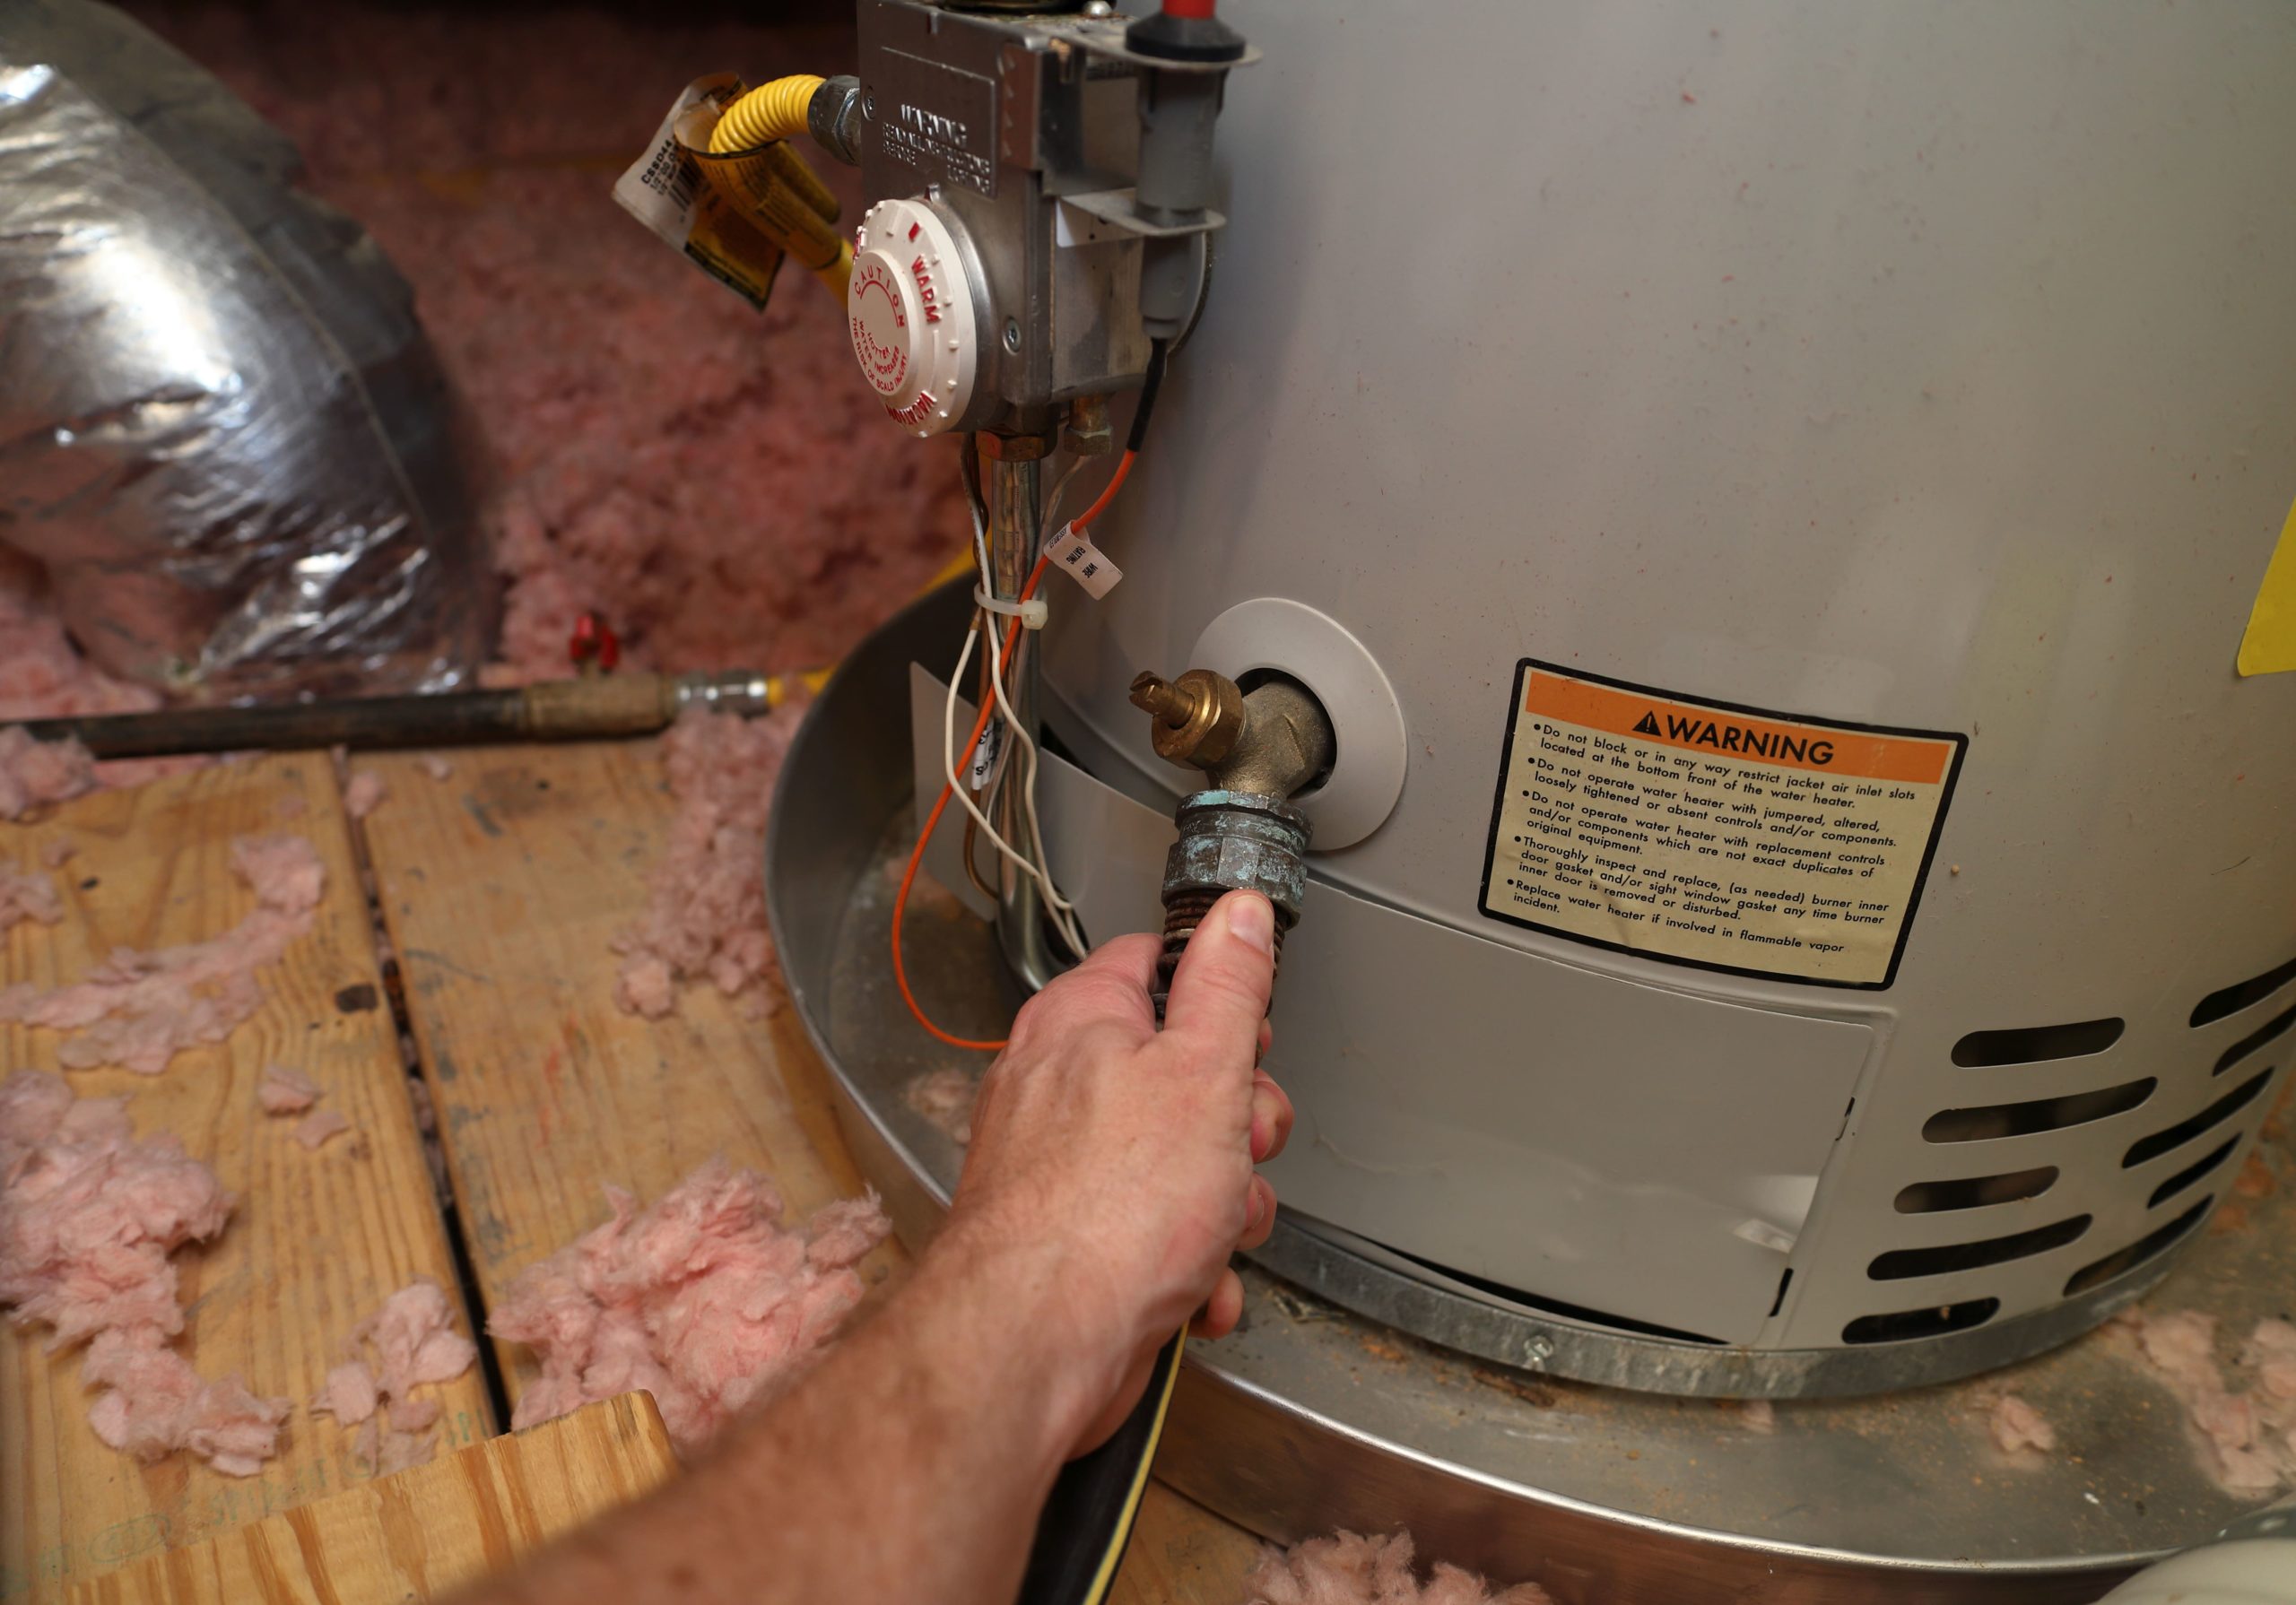 A man is working on a hot water heater